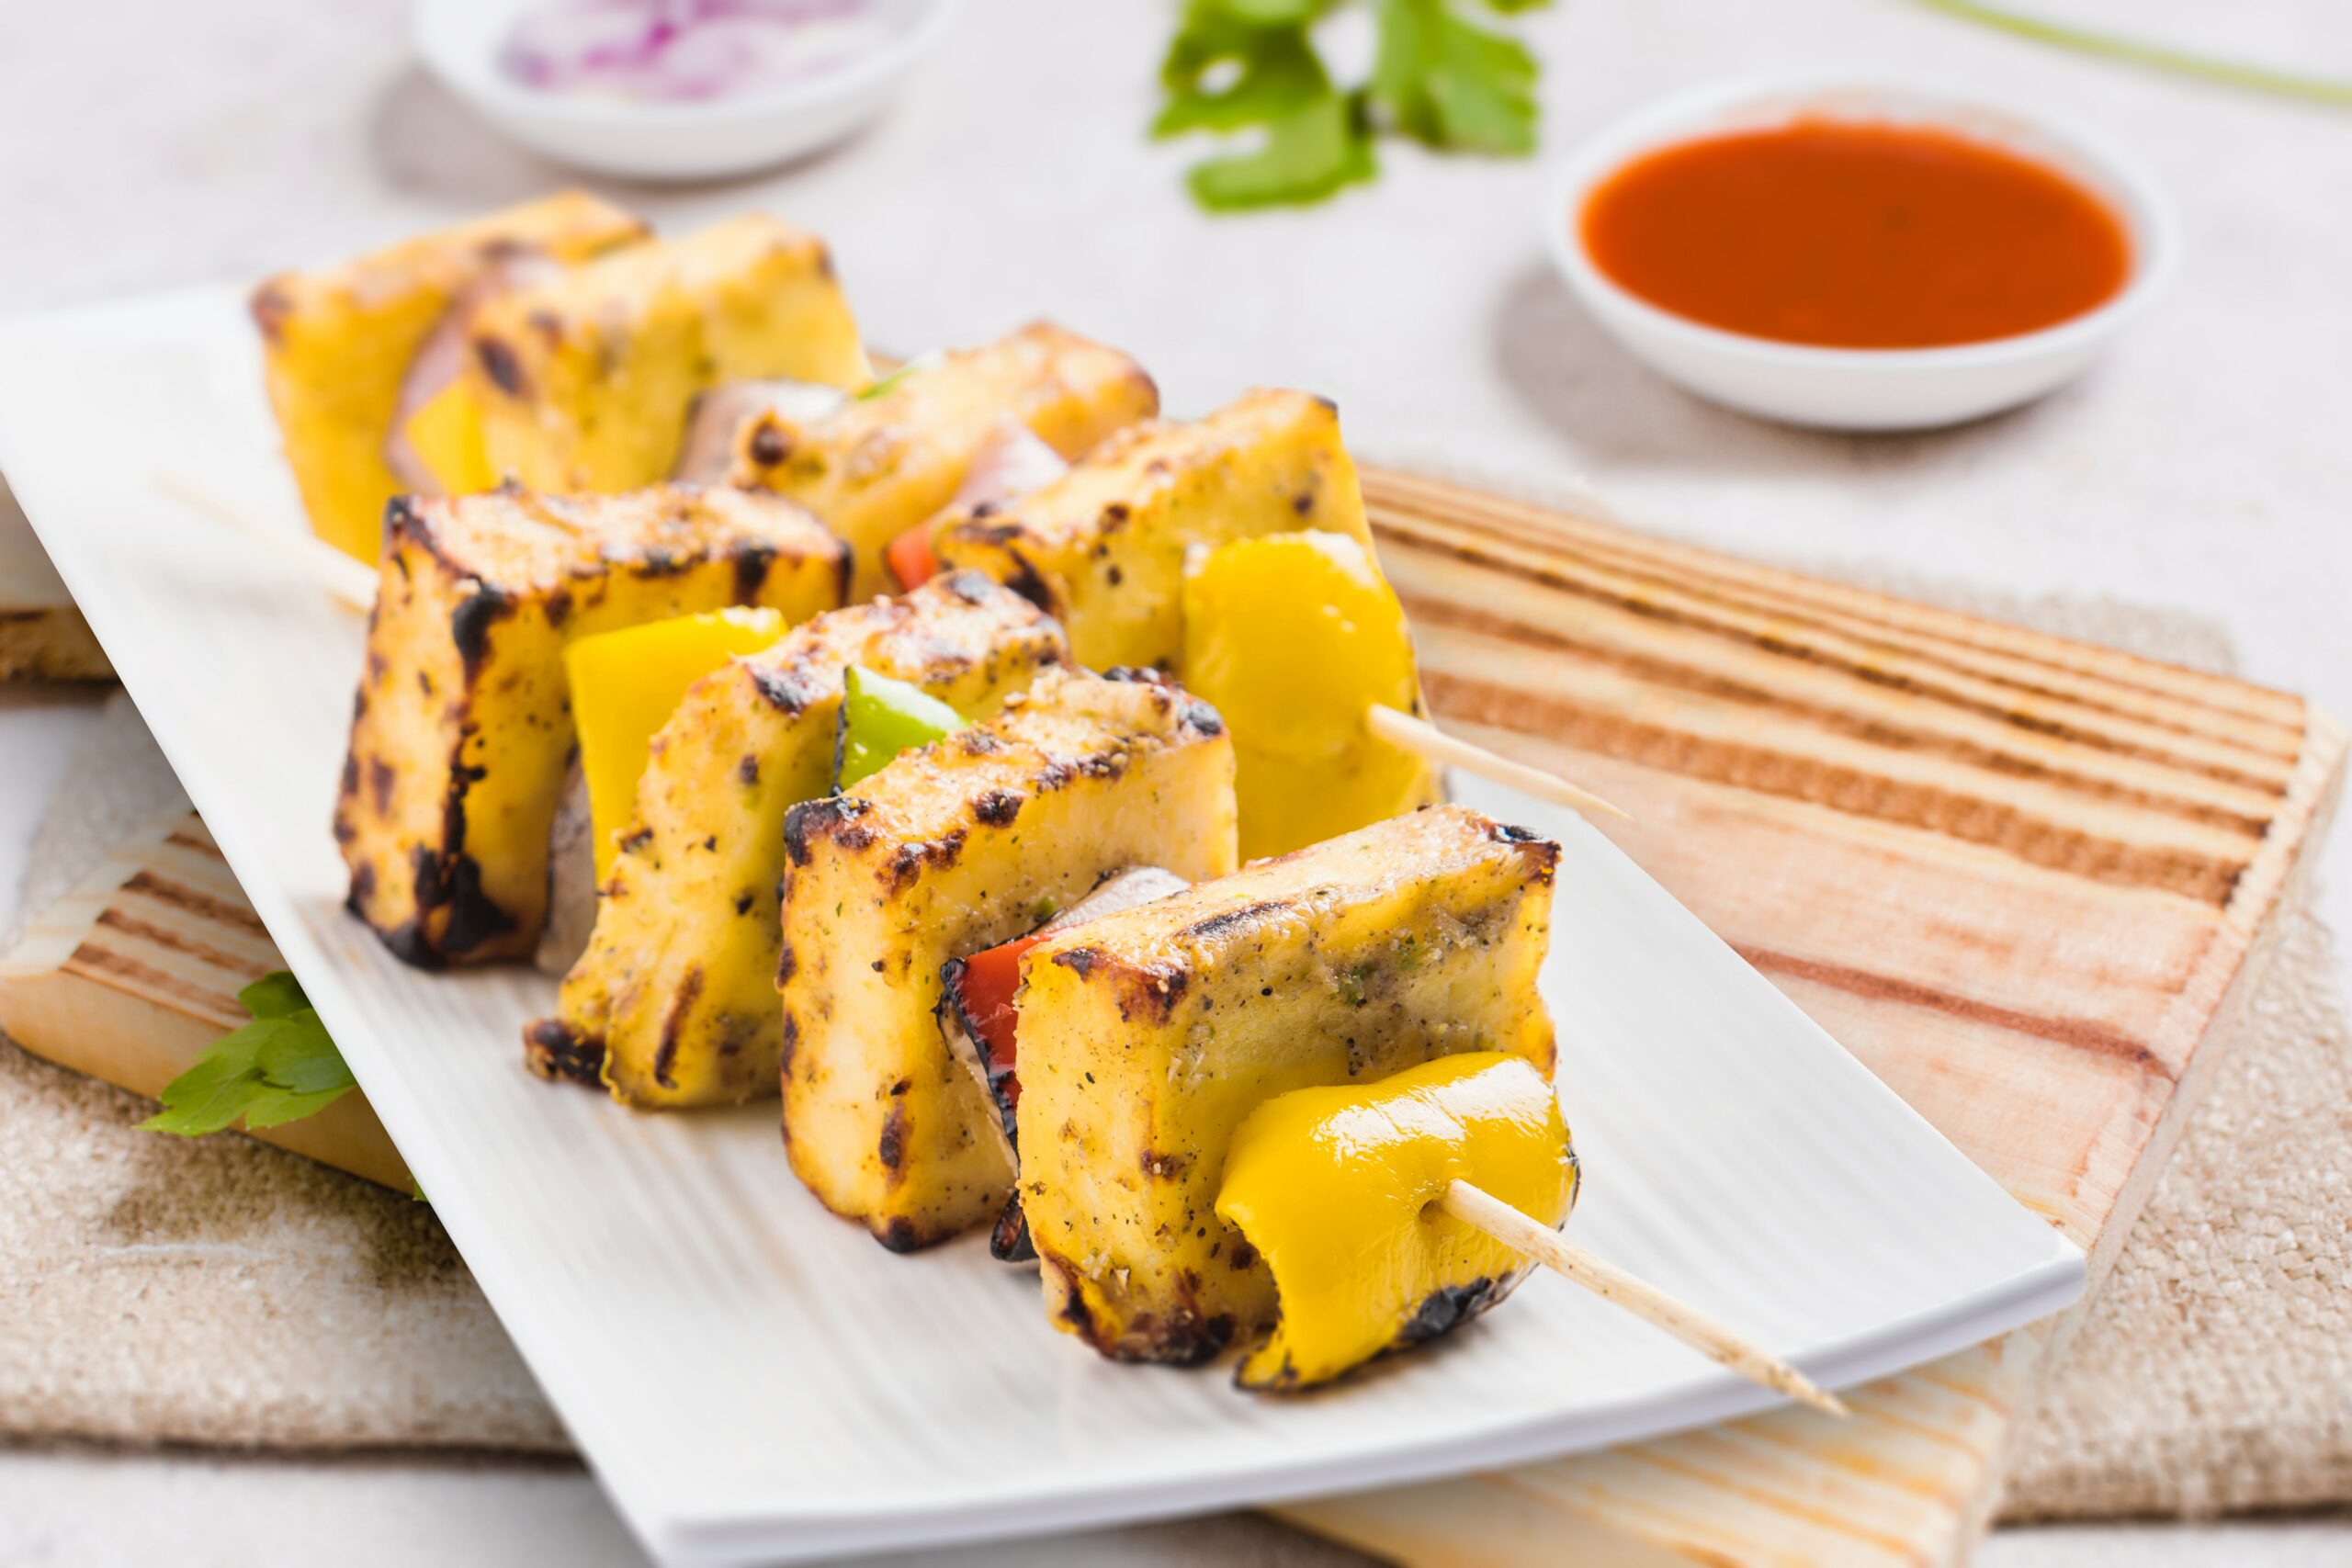 Paneer and peppers are grilled on a skewer. Either they look exceptionally tasty, or I’m exceptionally hungry.